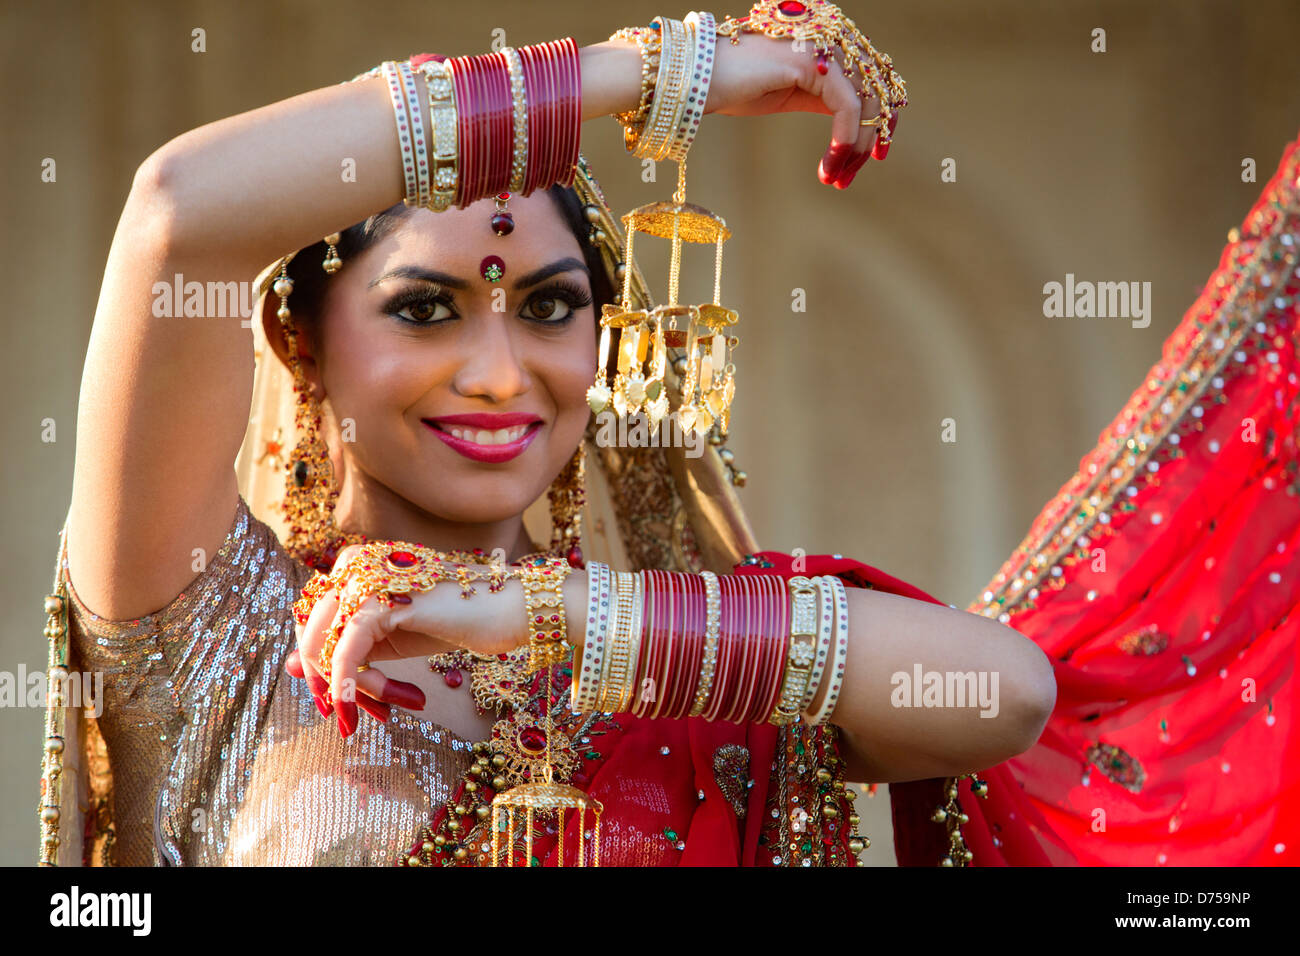 Beautiful Indian bride in traditional wedding dress and posing Stock  Photo Picture And Royalty Free Image Pic PNTPIRF20121217JH2261   agefotostock